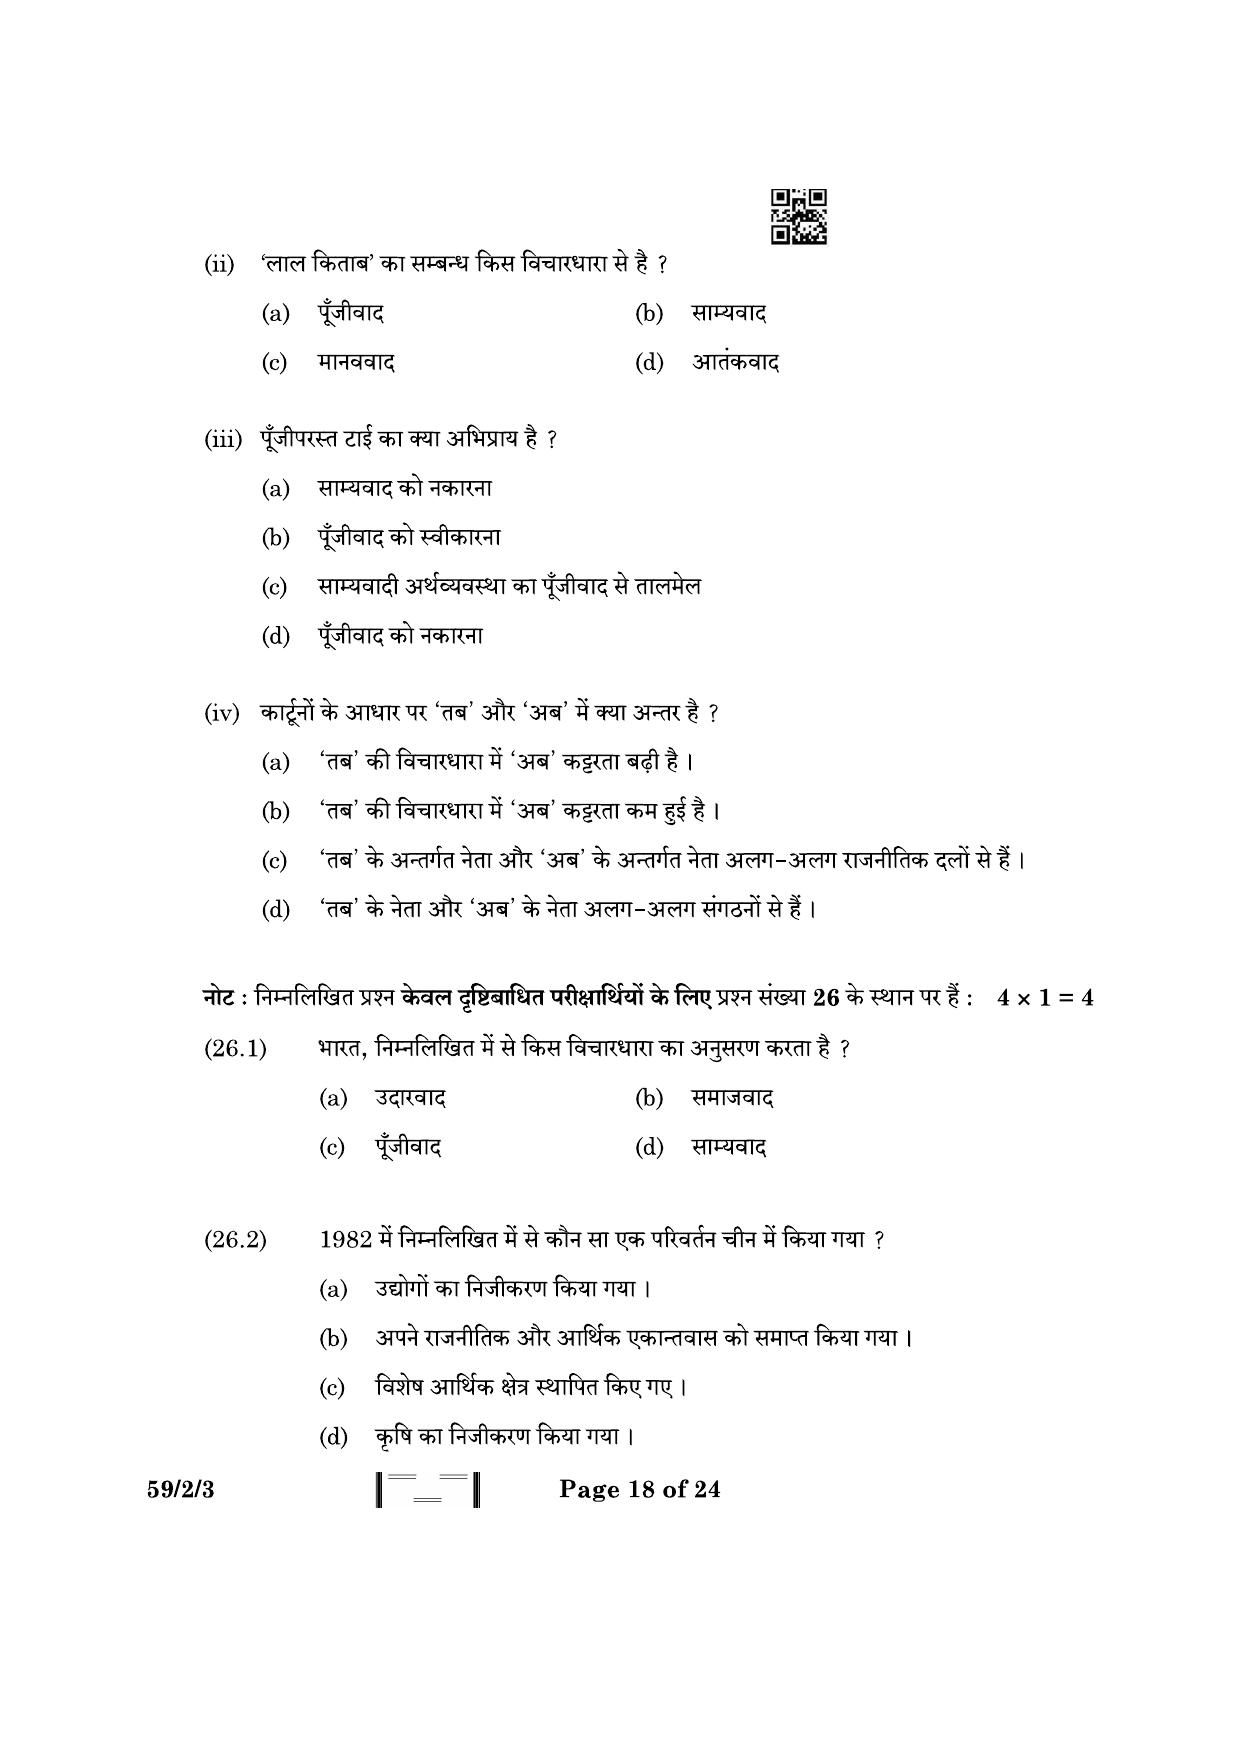 CBSE Class 12 59-2-3 Political Science 2023 Question Paper - Page 18